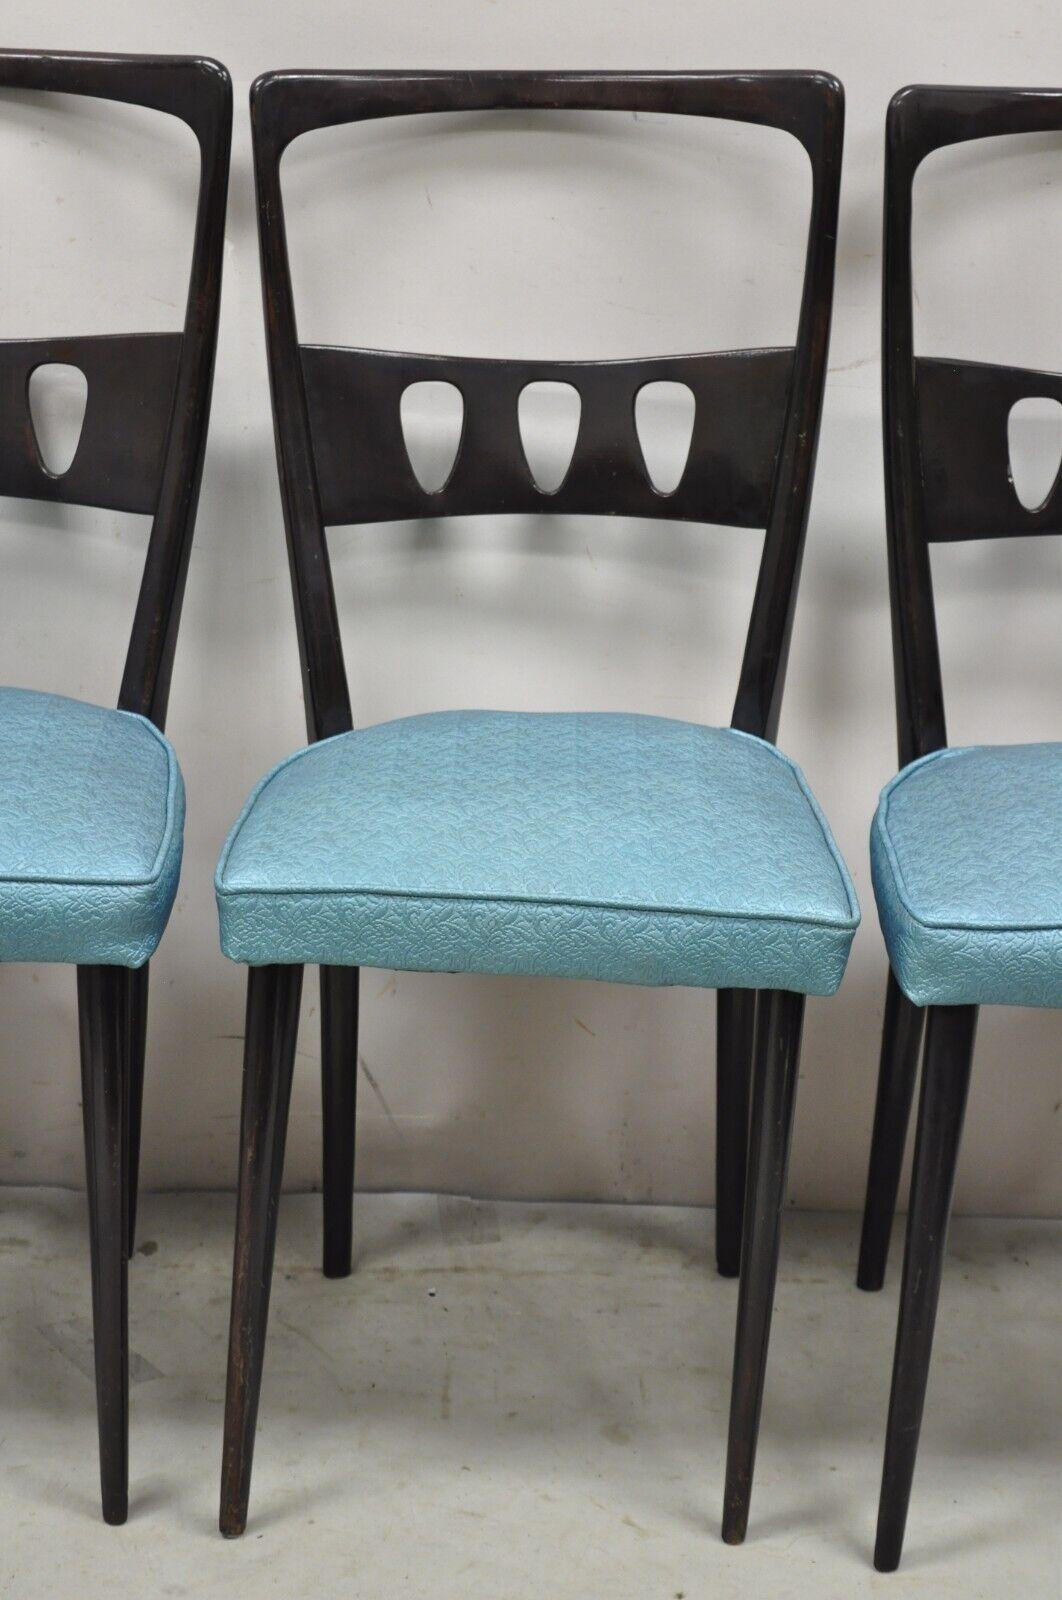 20th Century Vintage Italian Mid-Century Modern Ico Parisi Style Dining Chairs, Set of 4 For Sale